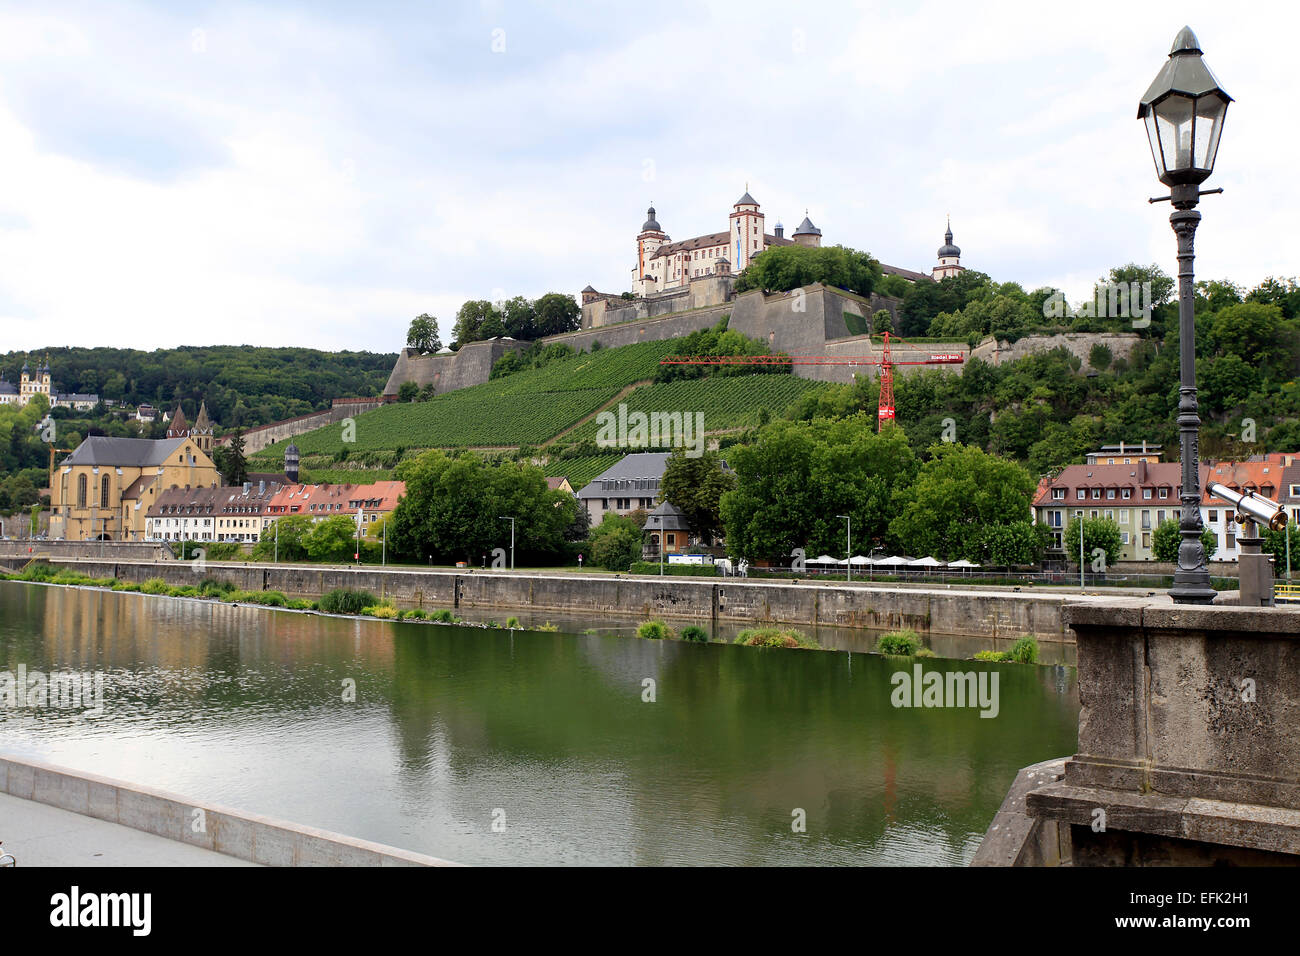 View from Marienberg Fortress. It's surrounded by vineyards and overlooks the ancient university city with its domes, towers and bridges. Photo: Klaus Nowottnick Date: August 11, 2012 Stock Photo